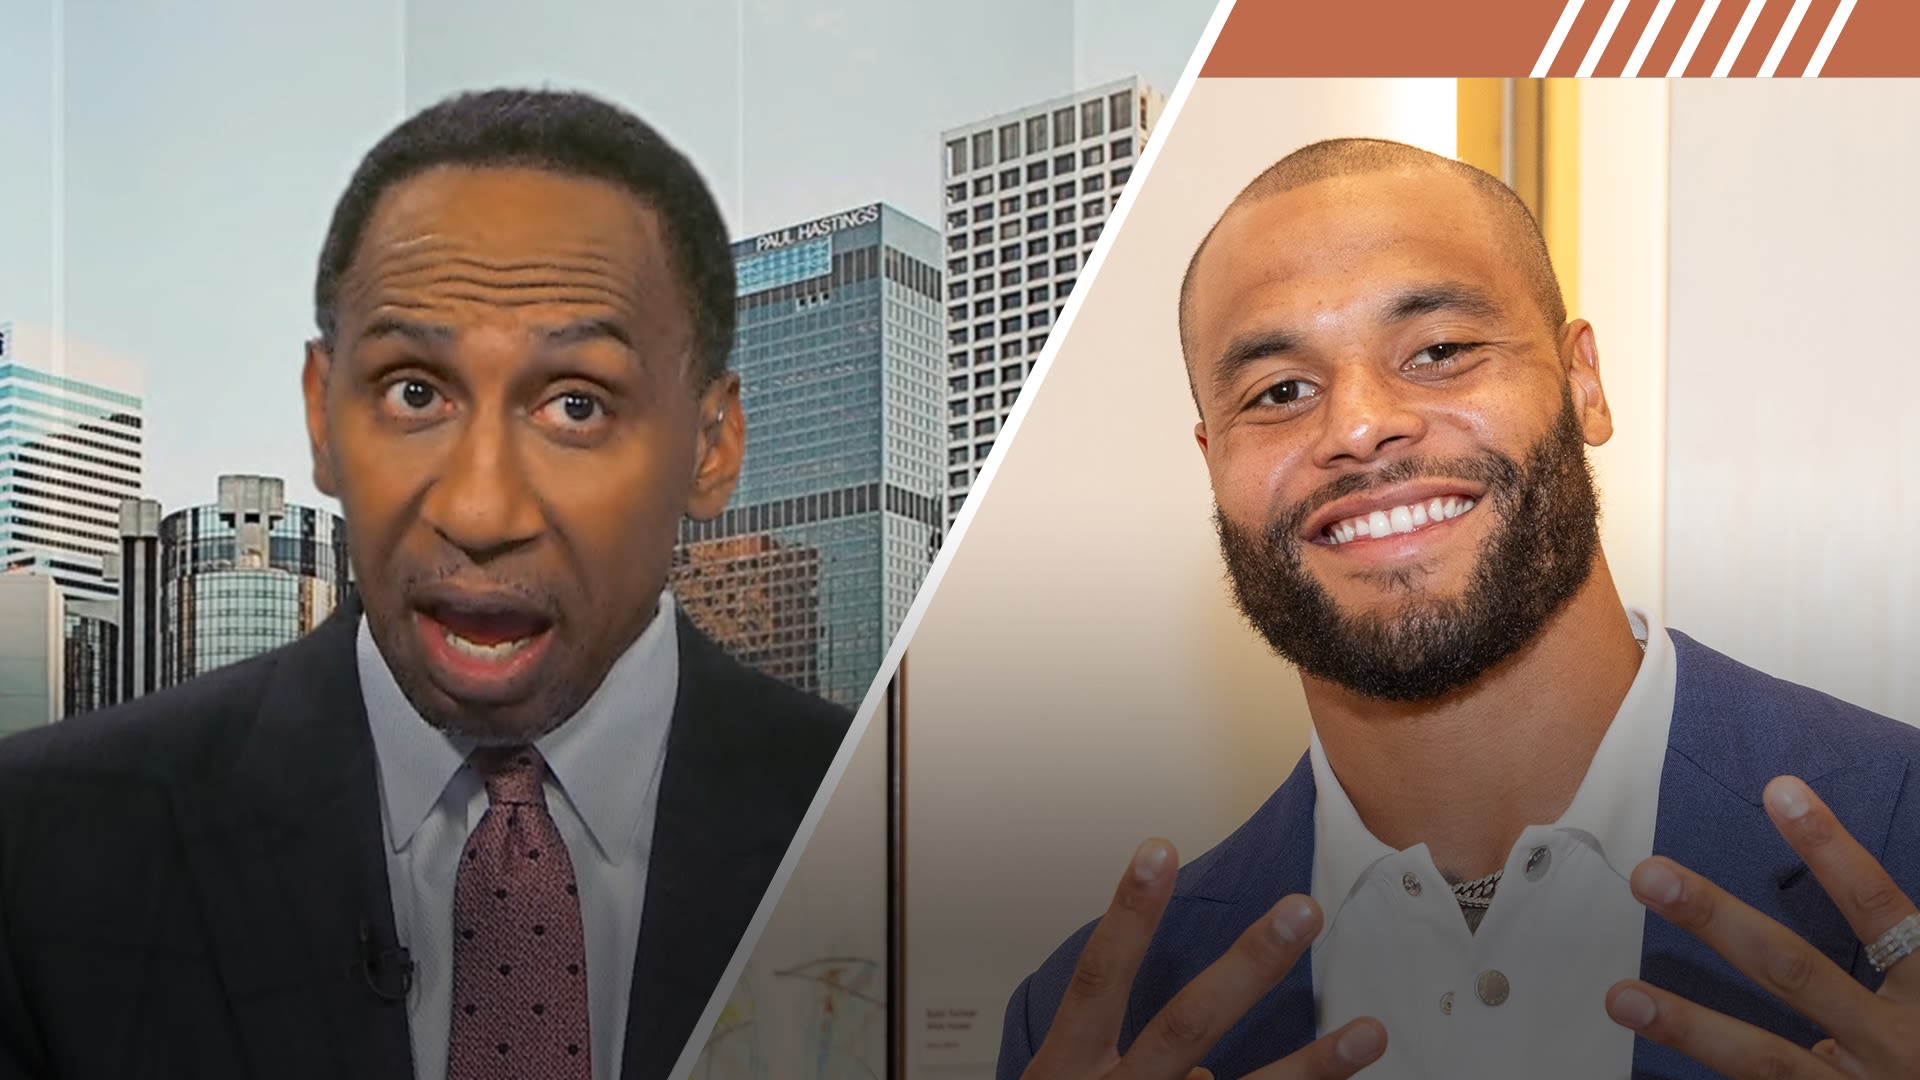 Stephen A. digs at Dak for claiming he doesn't play for money - Stream the Video - Watch ESPN